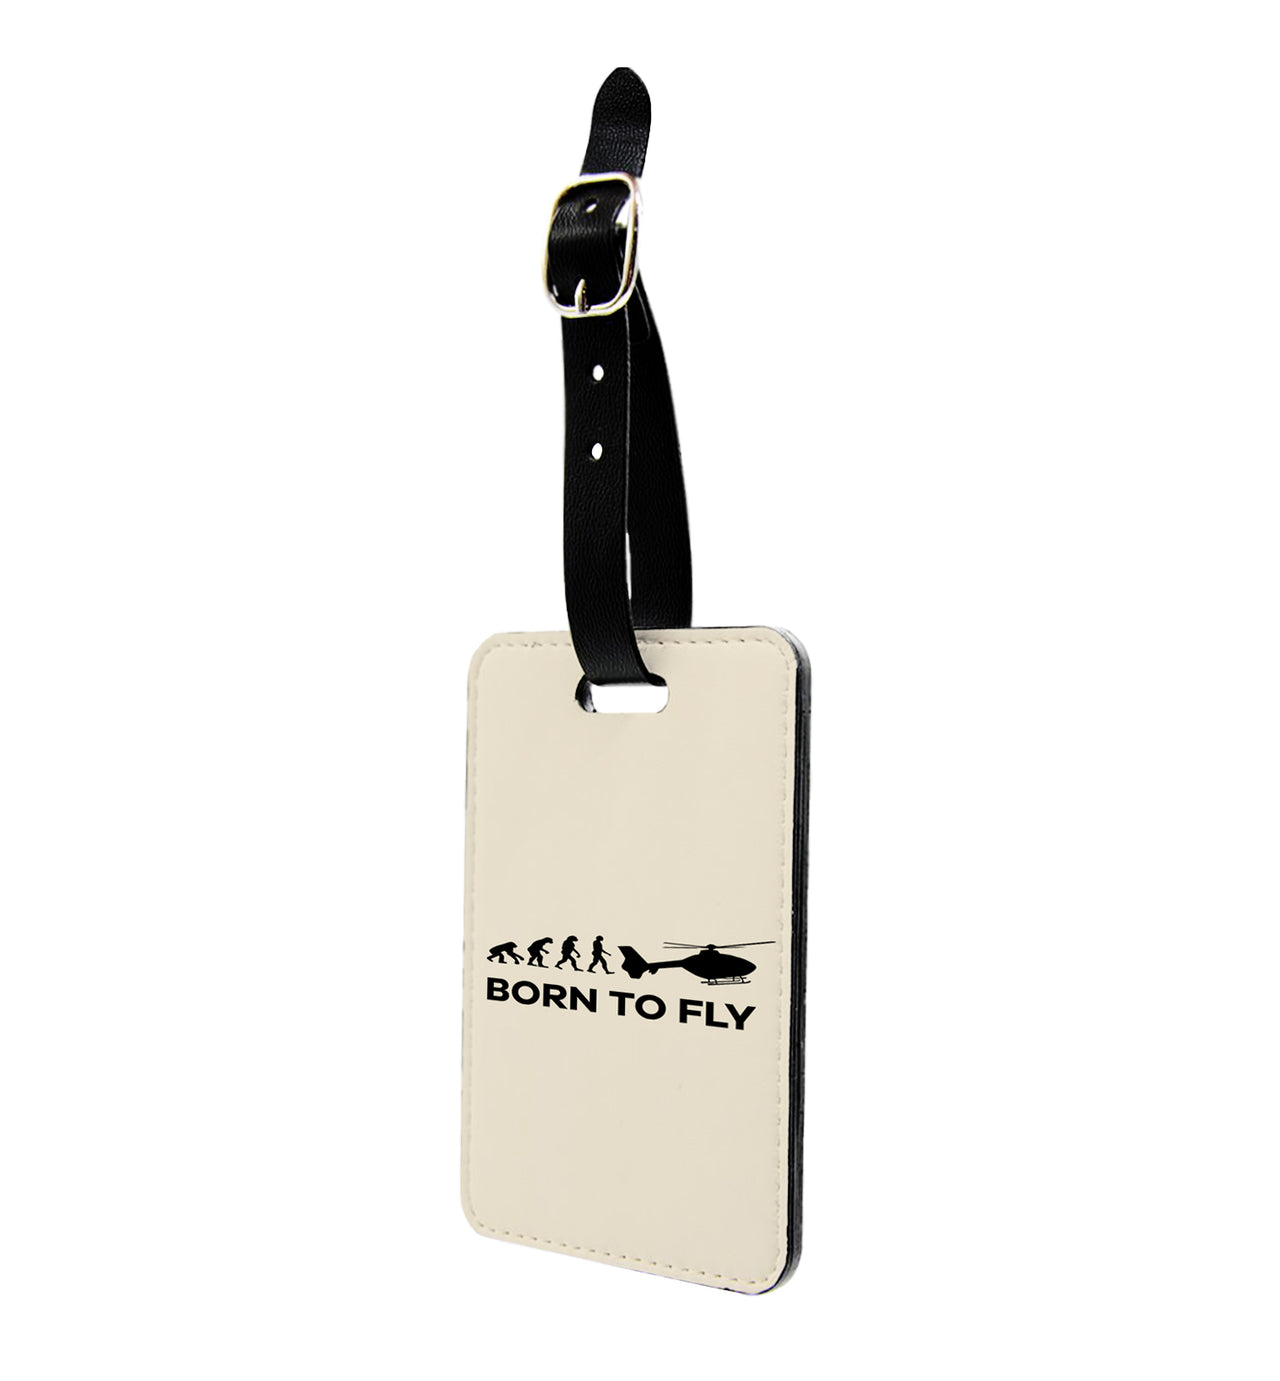 Born To Fly Helicopter Designed Luggage Tag